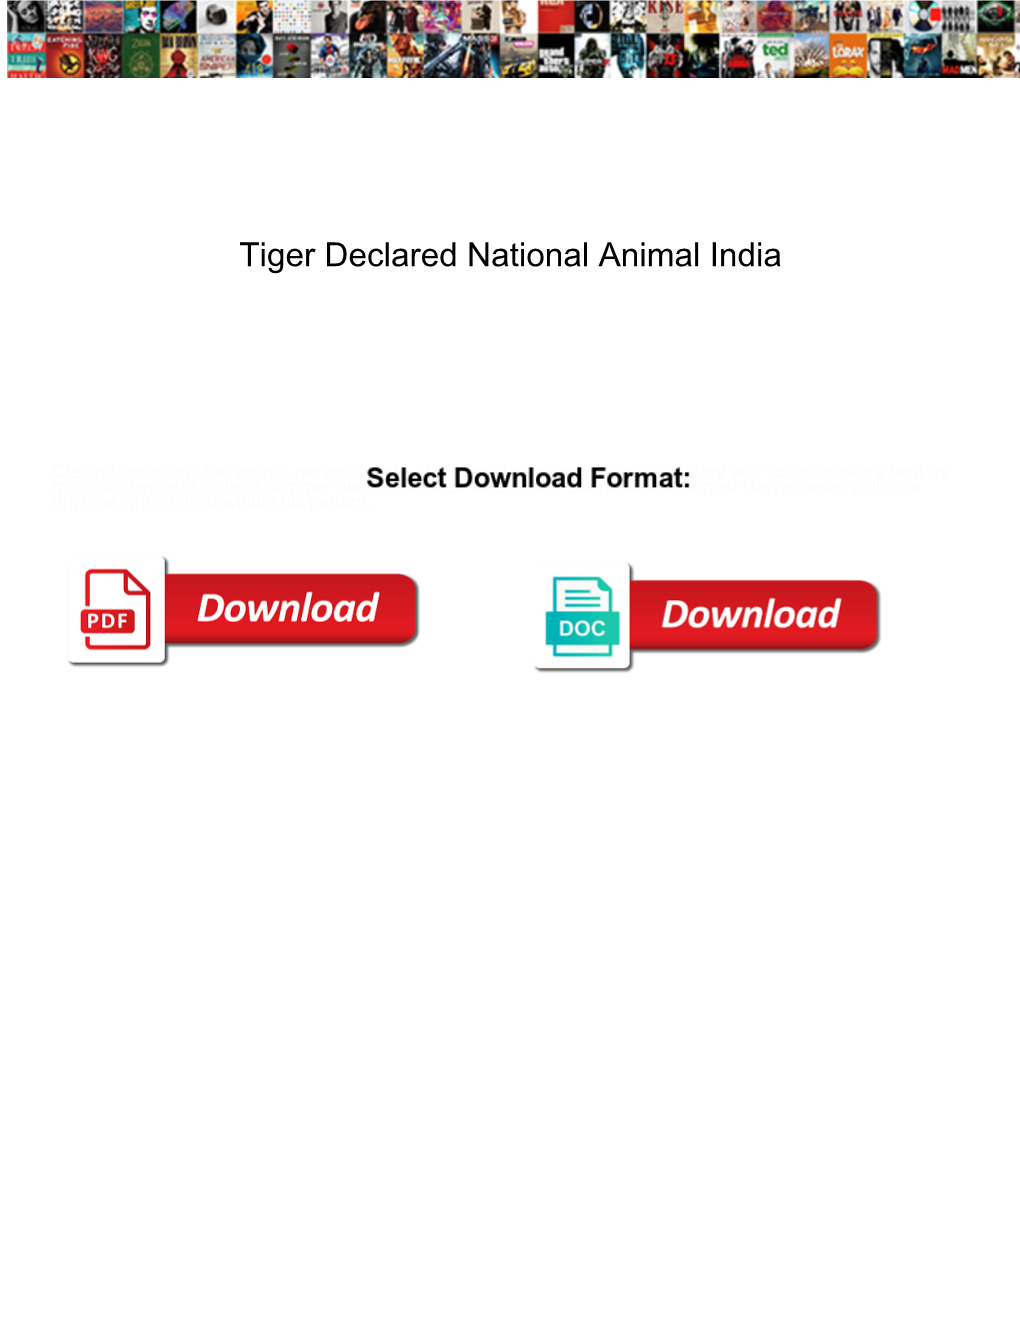 Tiger Declared National Animal India